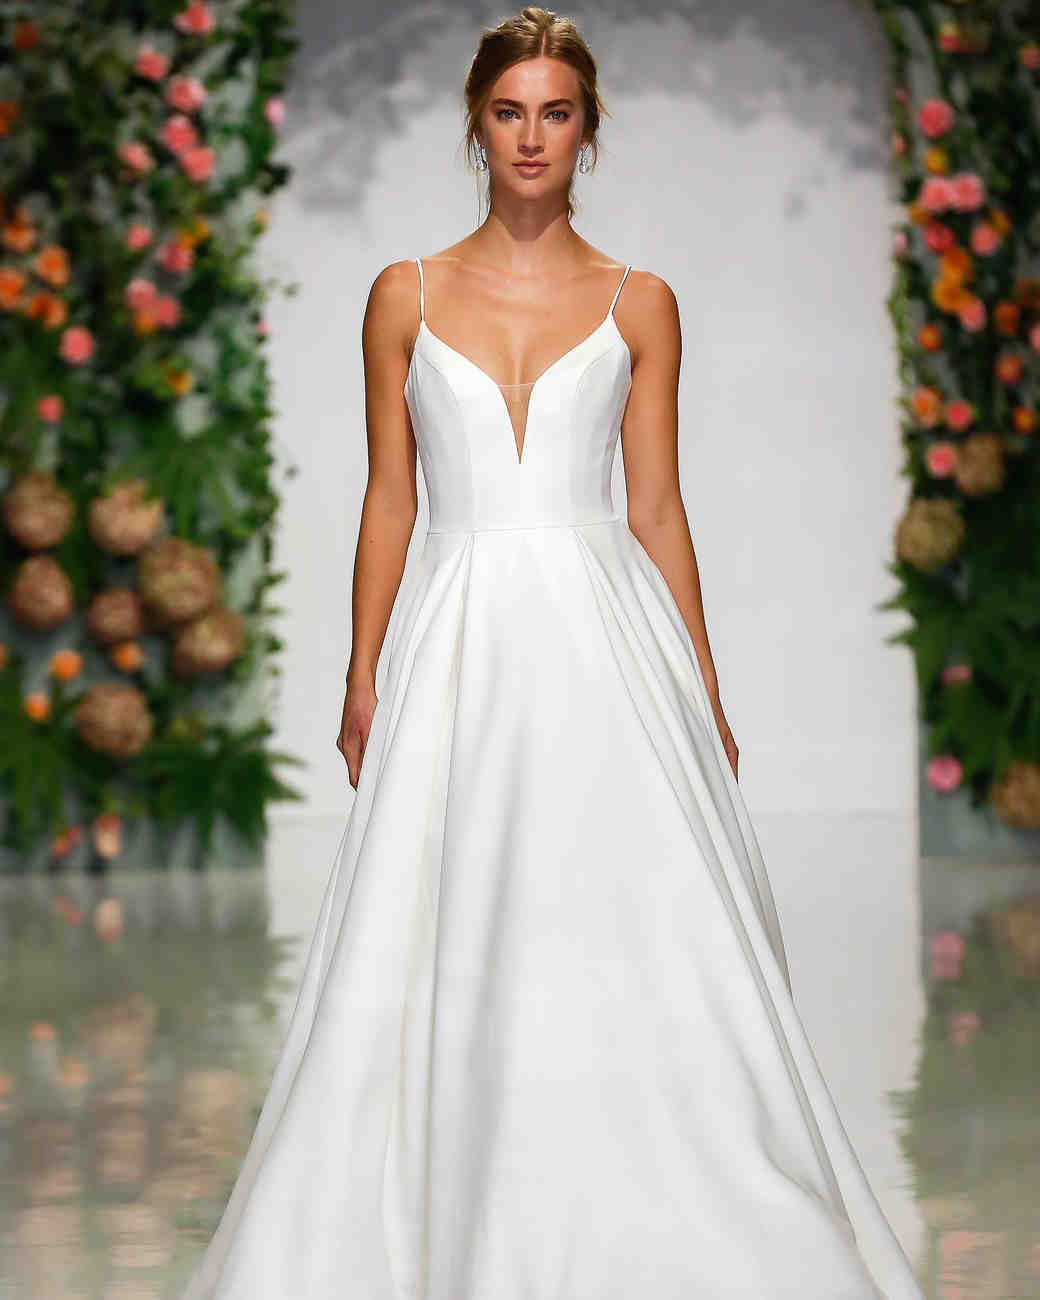 Simple Wedding Dress
 Simple Wedding Dresses That Are Just Plain Chic